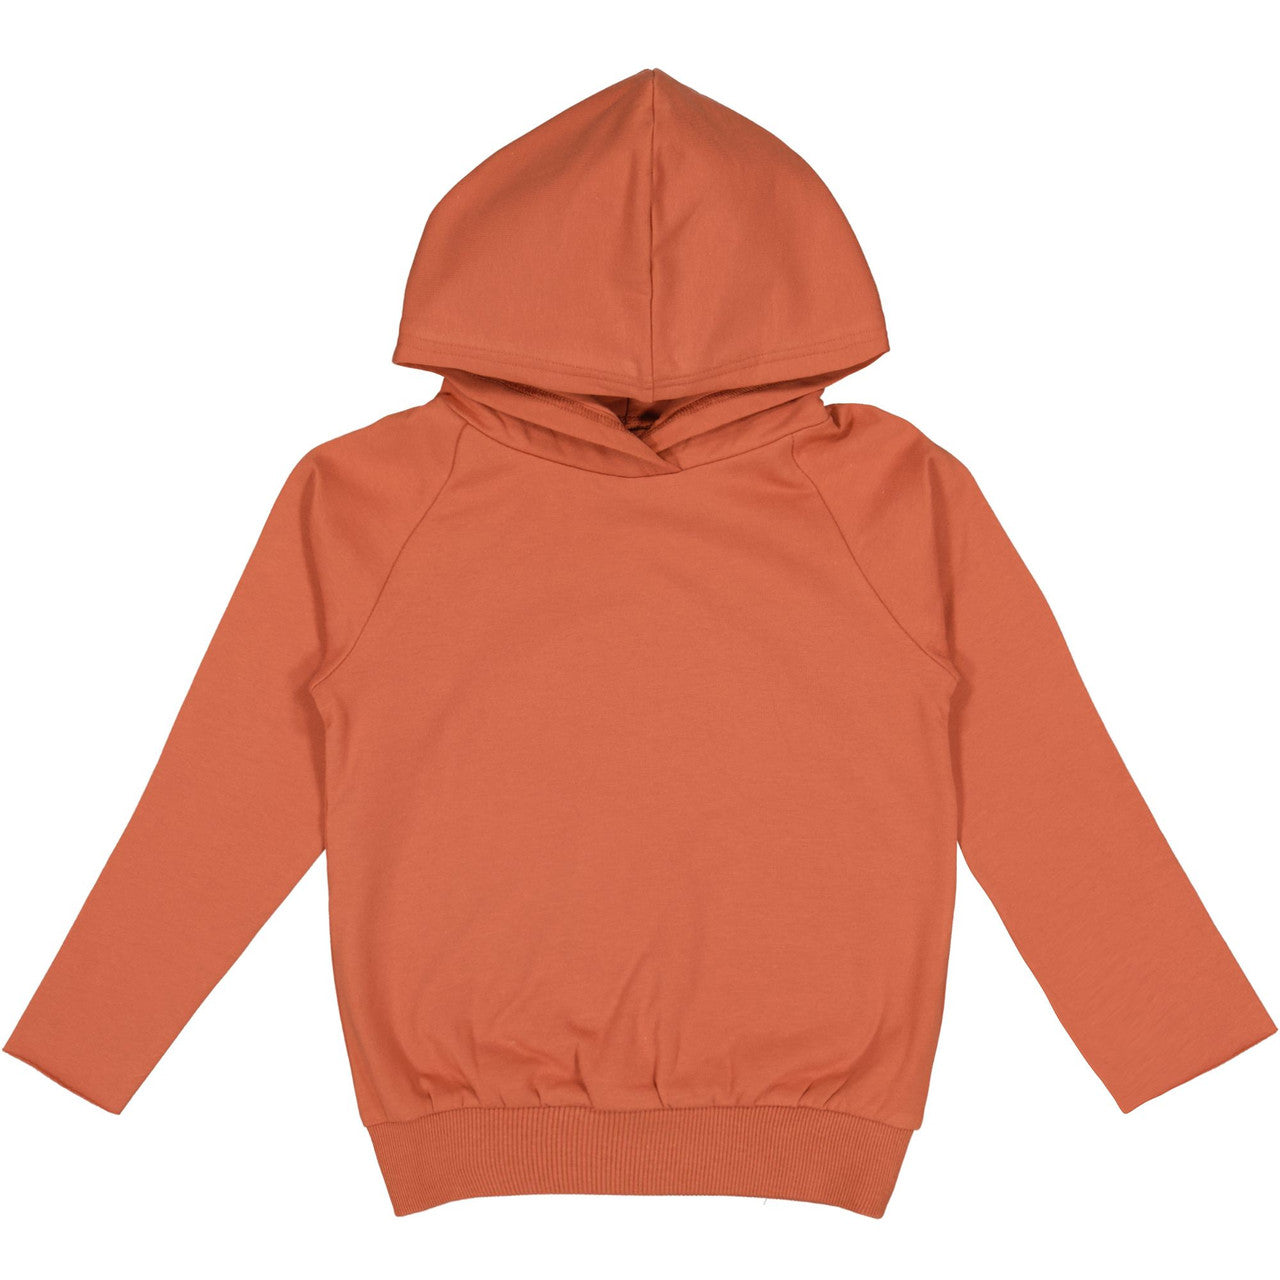 Little Hedonist super soft and cozy organic hooded sweater in Potters Clay